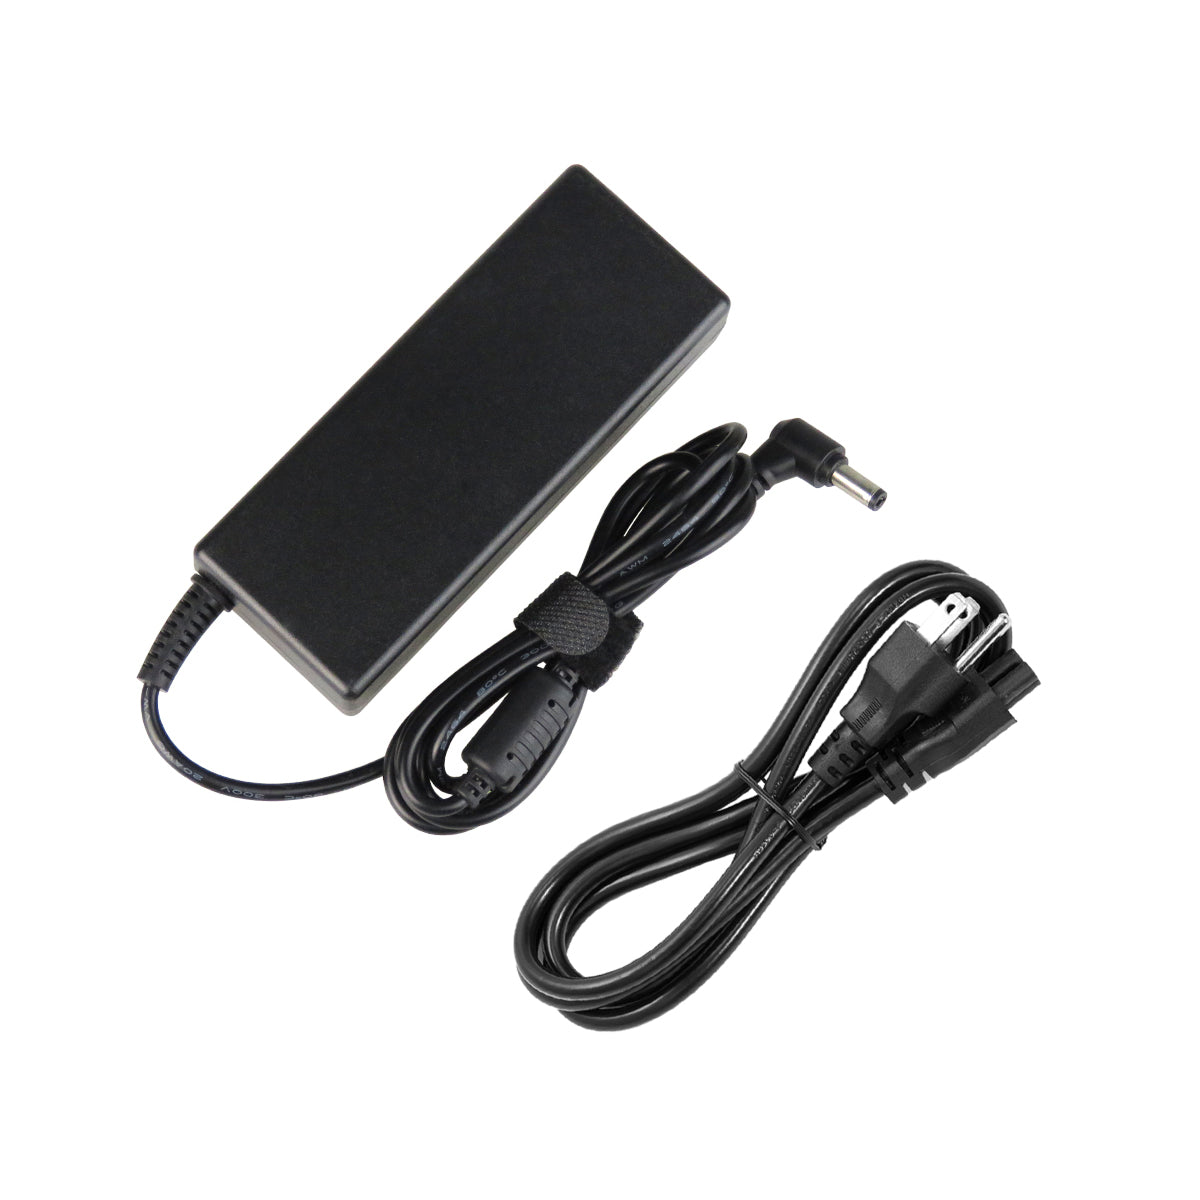 AC Adapter Charger for ASUS K55 Notebook.